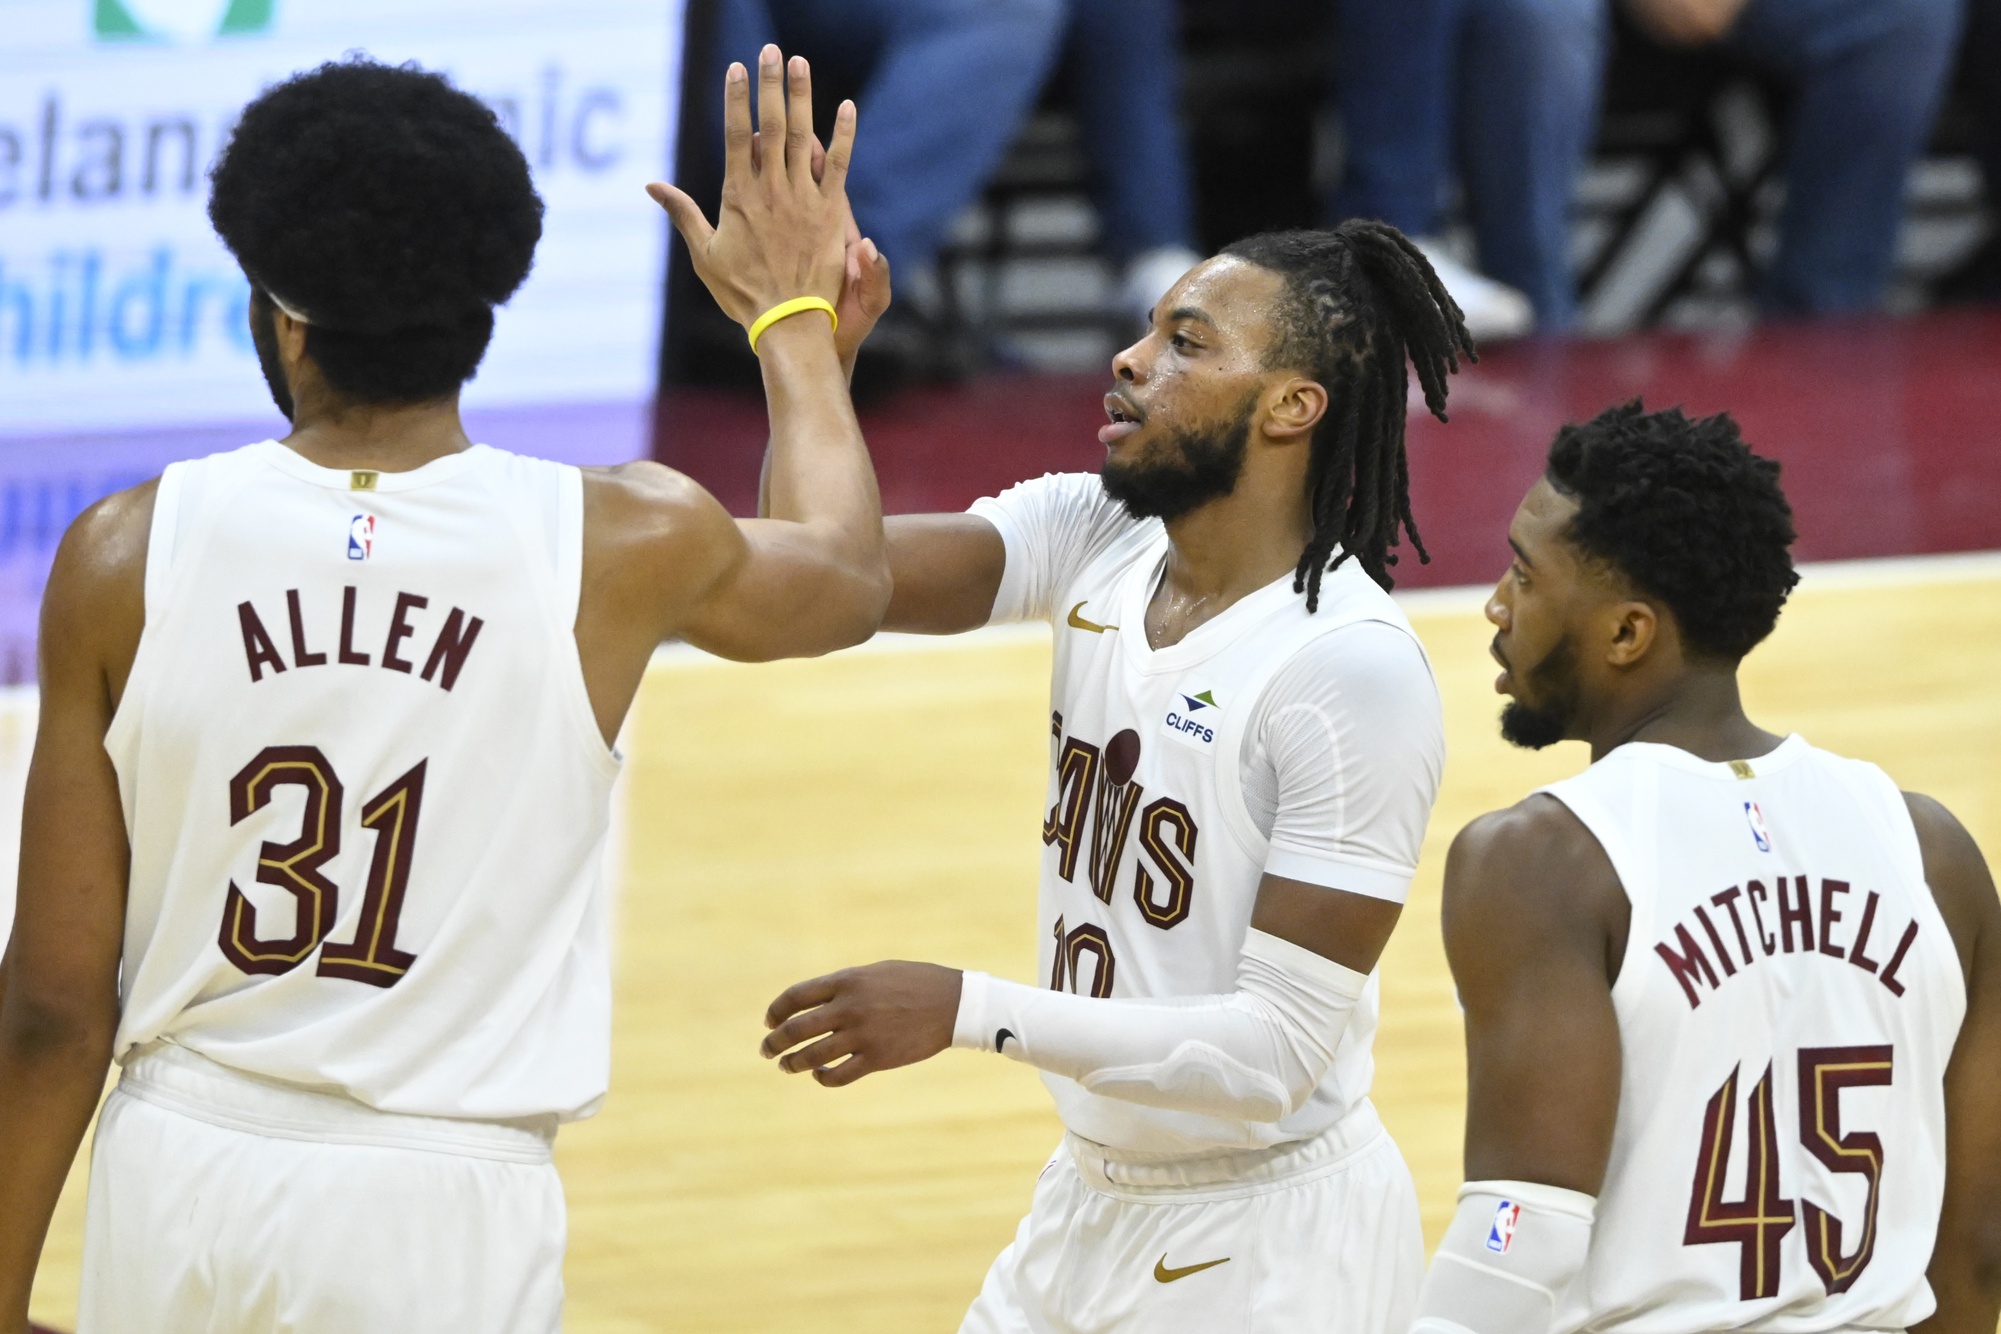 Cleveland Cavaliers center Jarrett Allen (31), guard Darius Garland (10), and guard Donovan Mitchell (45) celebrate in the fourth quarter against the Toronto Raptors at Rocket Mortgage FieldHouse.